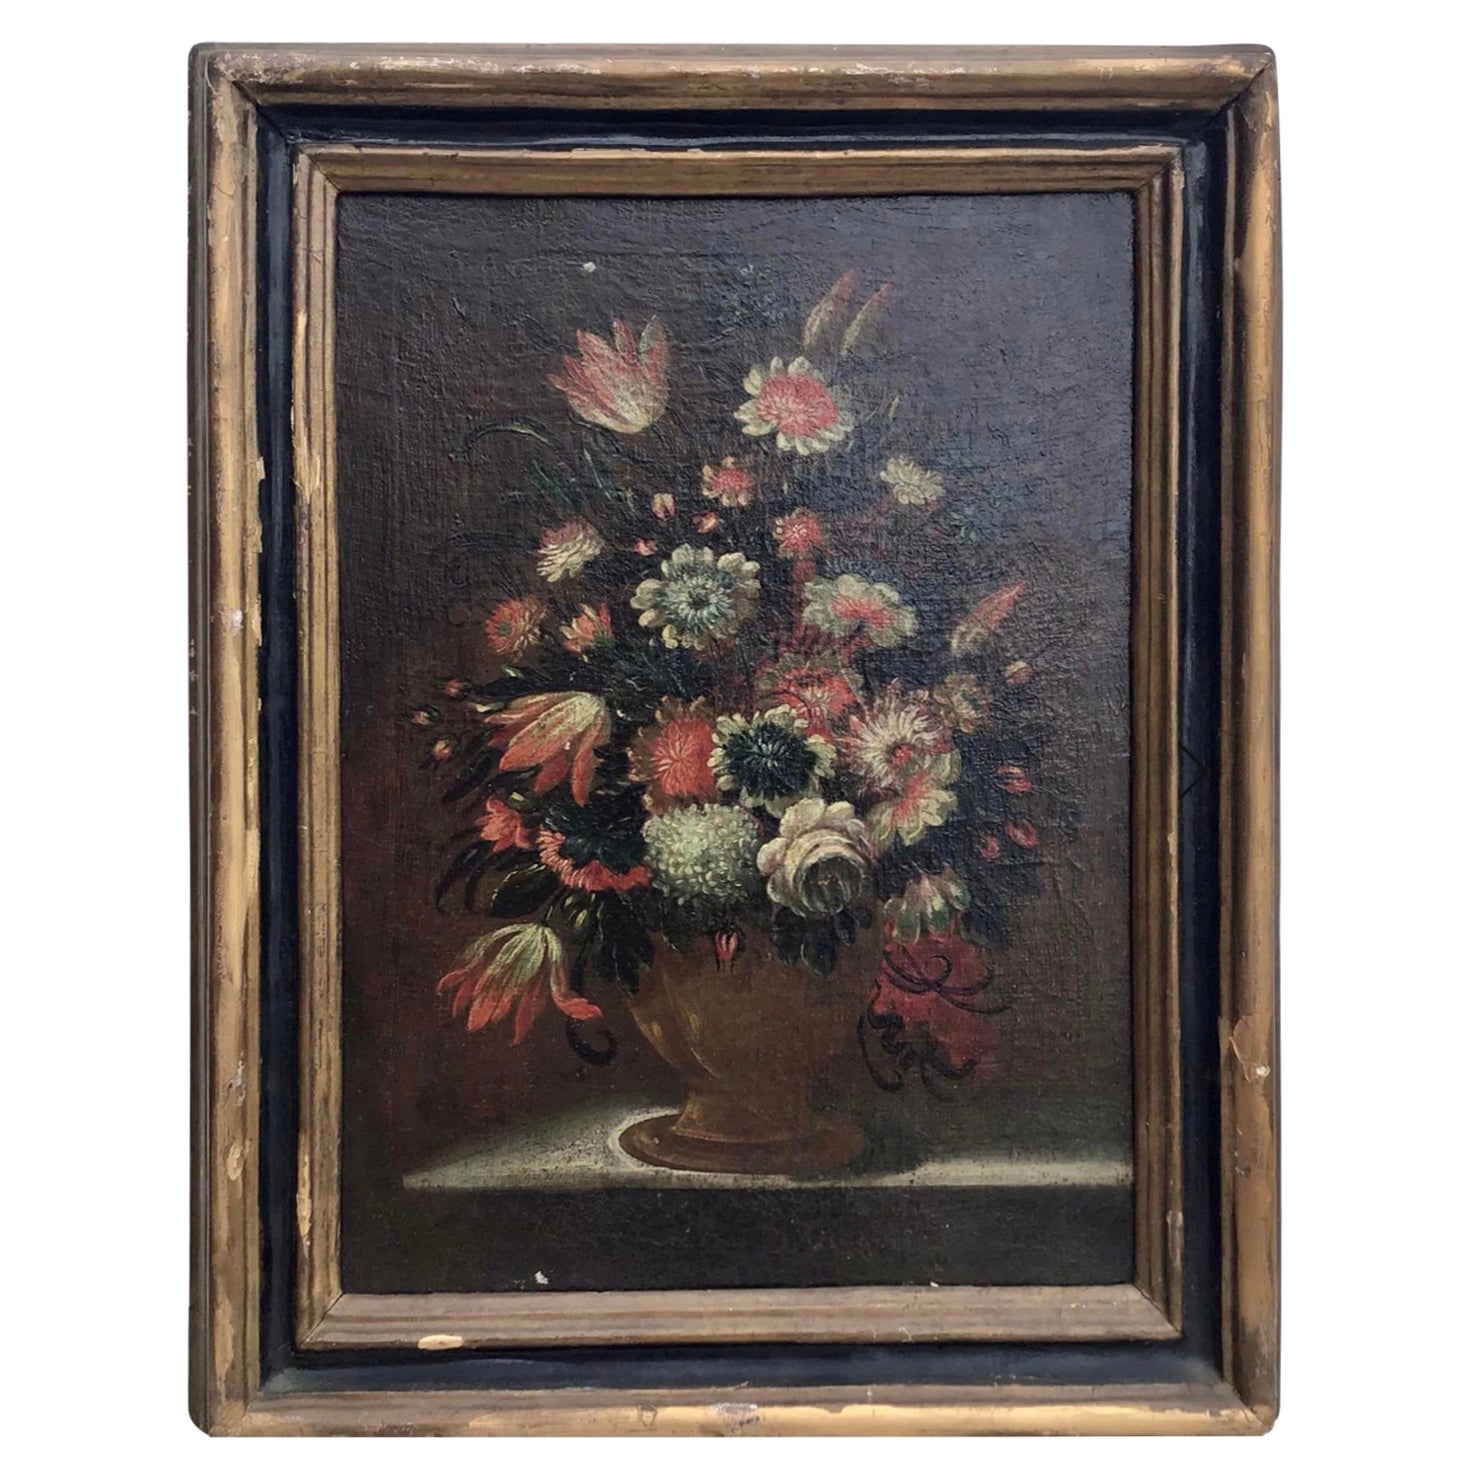 Antique Old Master Floral Still Life Oil Painting Flowers 18th Century Italian